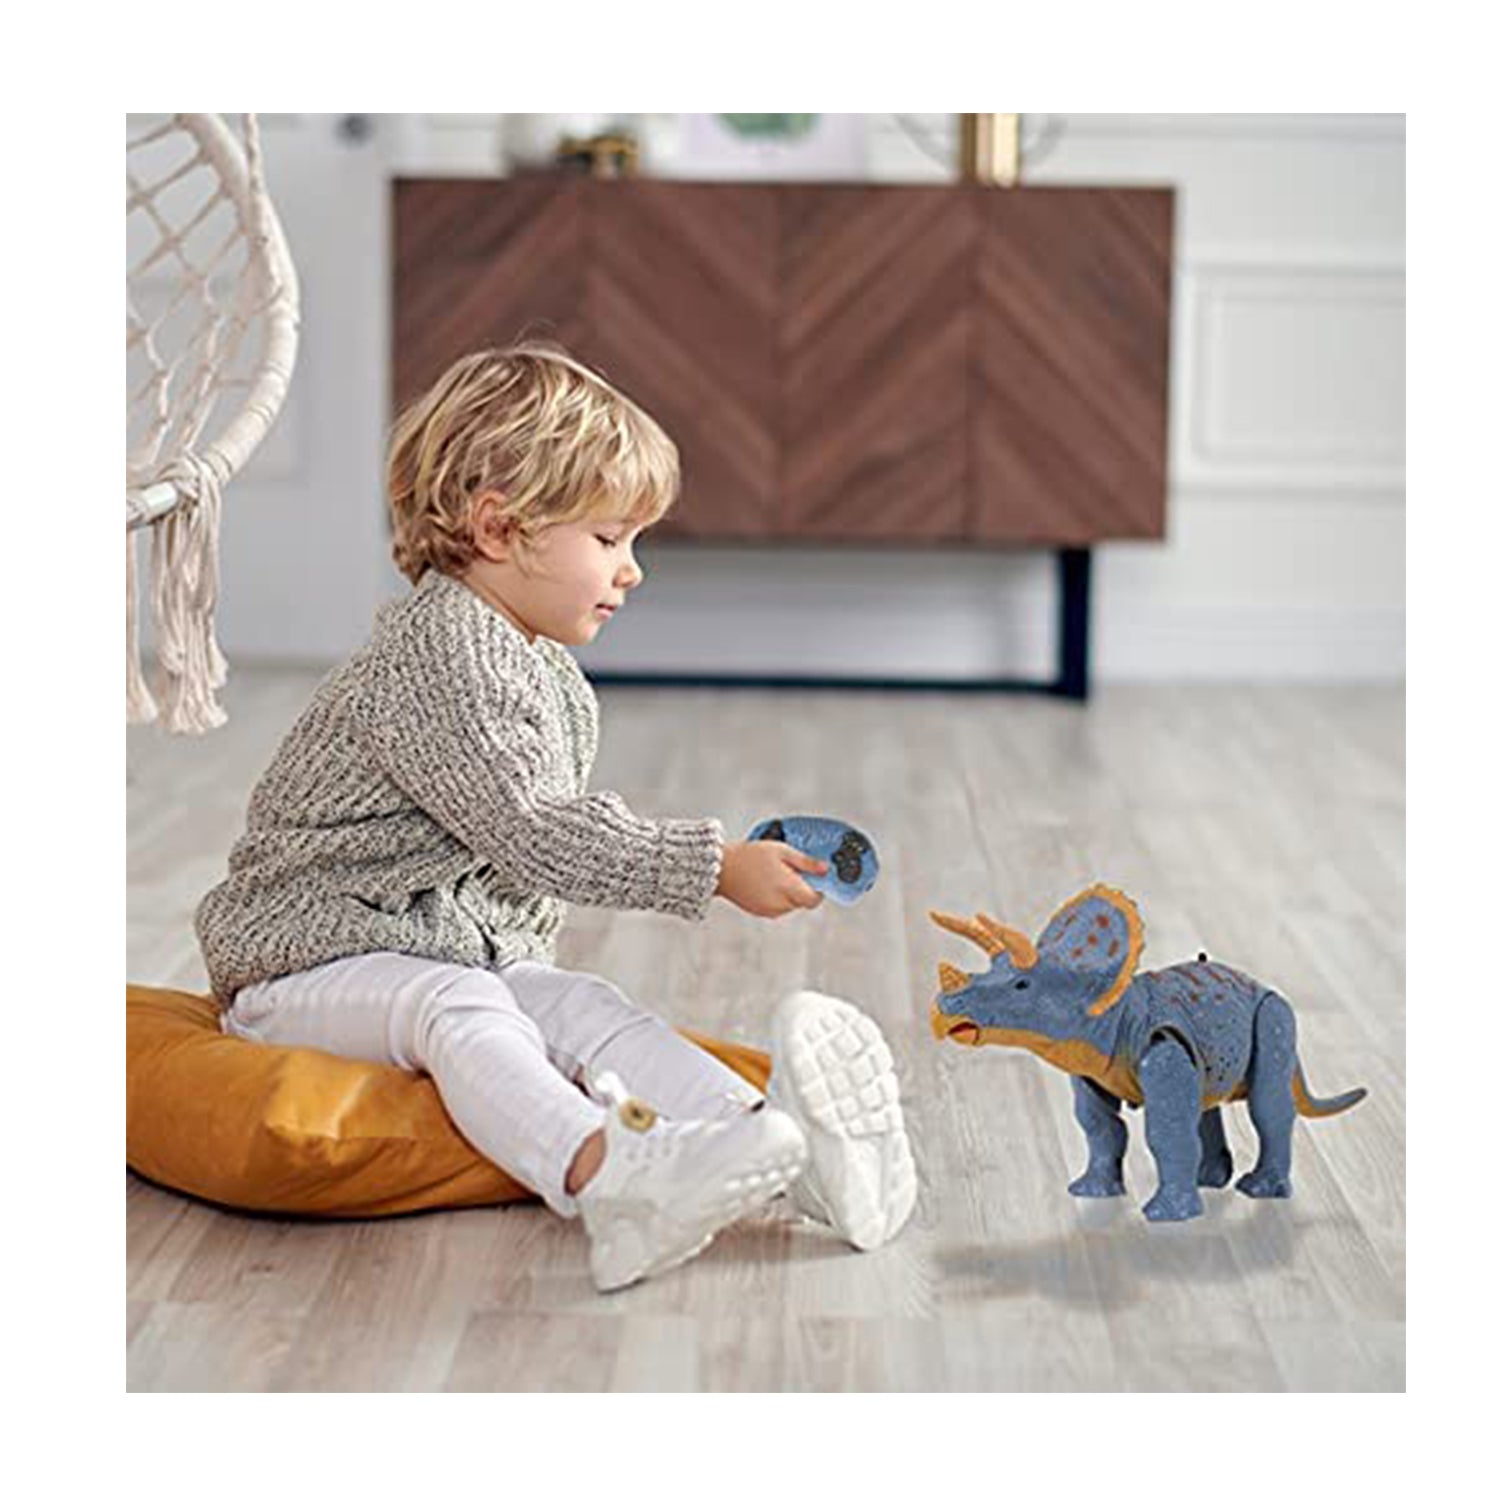 Contixo DR2 Remote Control RC Walking Triceratops Dinosaur Toy